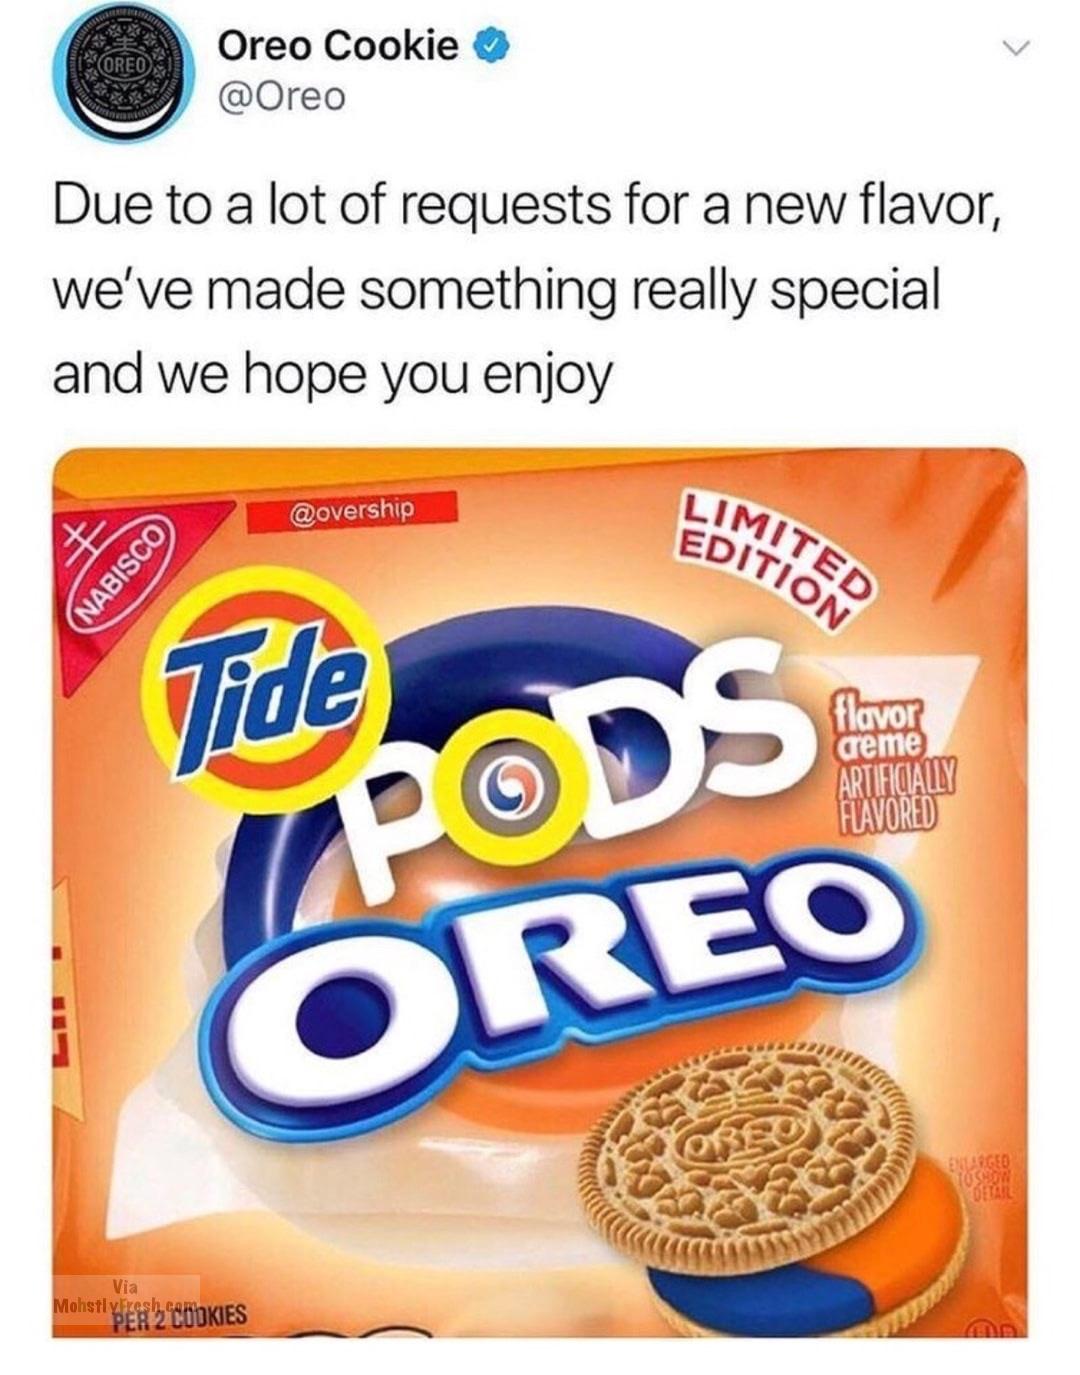 dank meme photoshopped tide pod oreo - Pored Oreo Cookie Due to a lot of requests for a new flavor, we've made something really special and we hope you enjoy Imited Edition Nabisco Tide flavor Pods Creme Artificially Flavored Creo Mohstylesh G Dokies